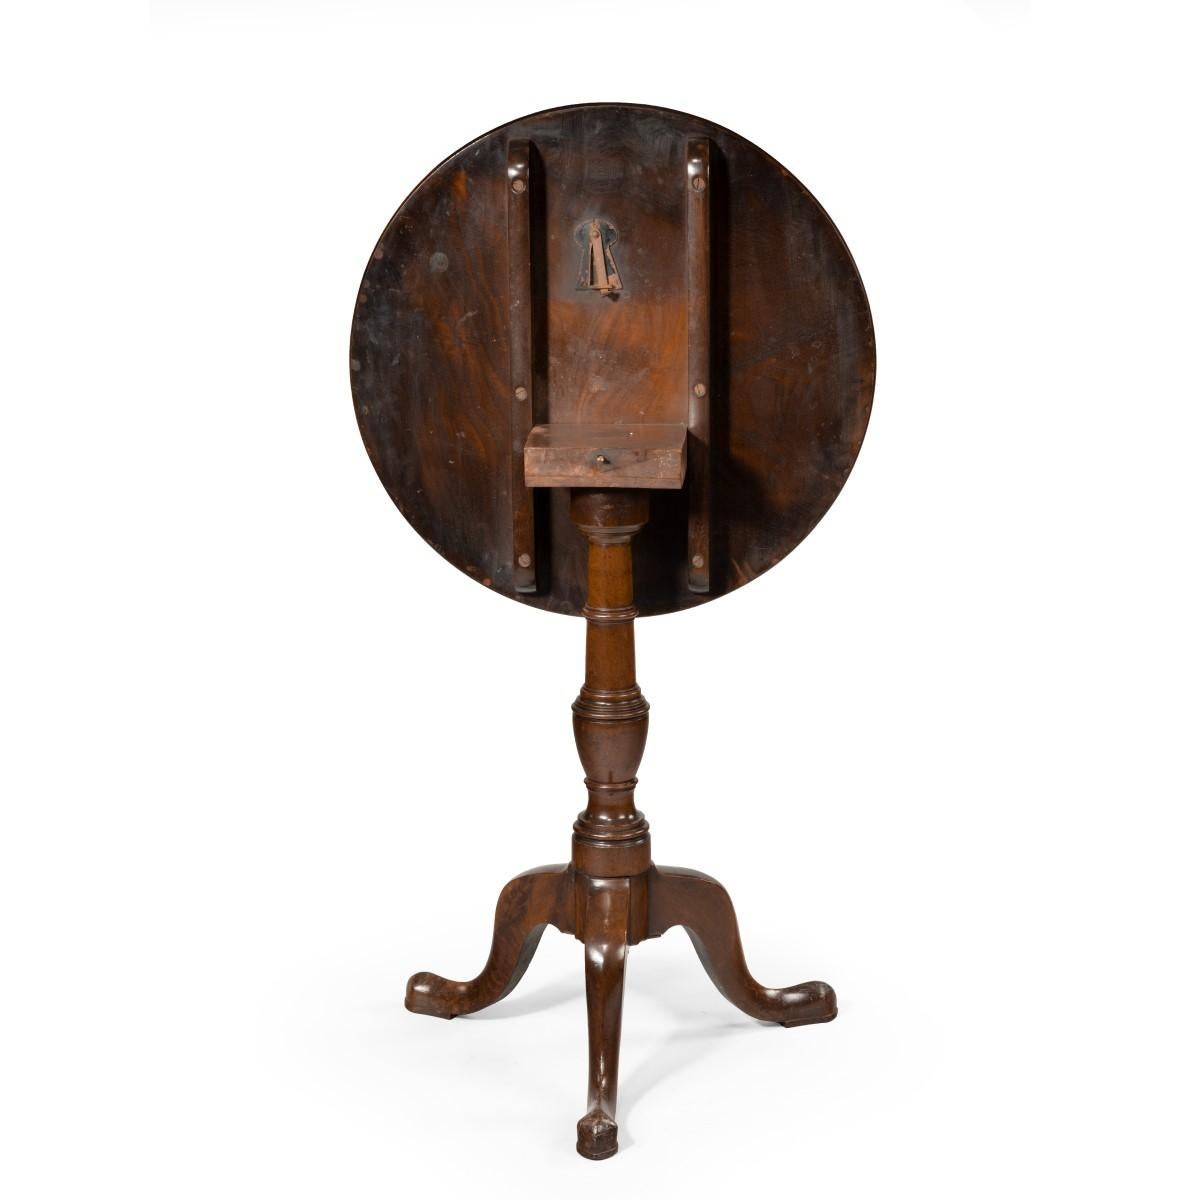 A George III mahogany tilt-top occasional table, the circular top made from a single piece, raised on a turned vase-shaped support. English, circa 1800.
  